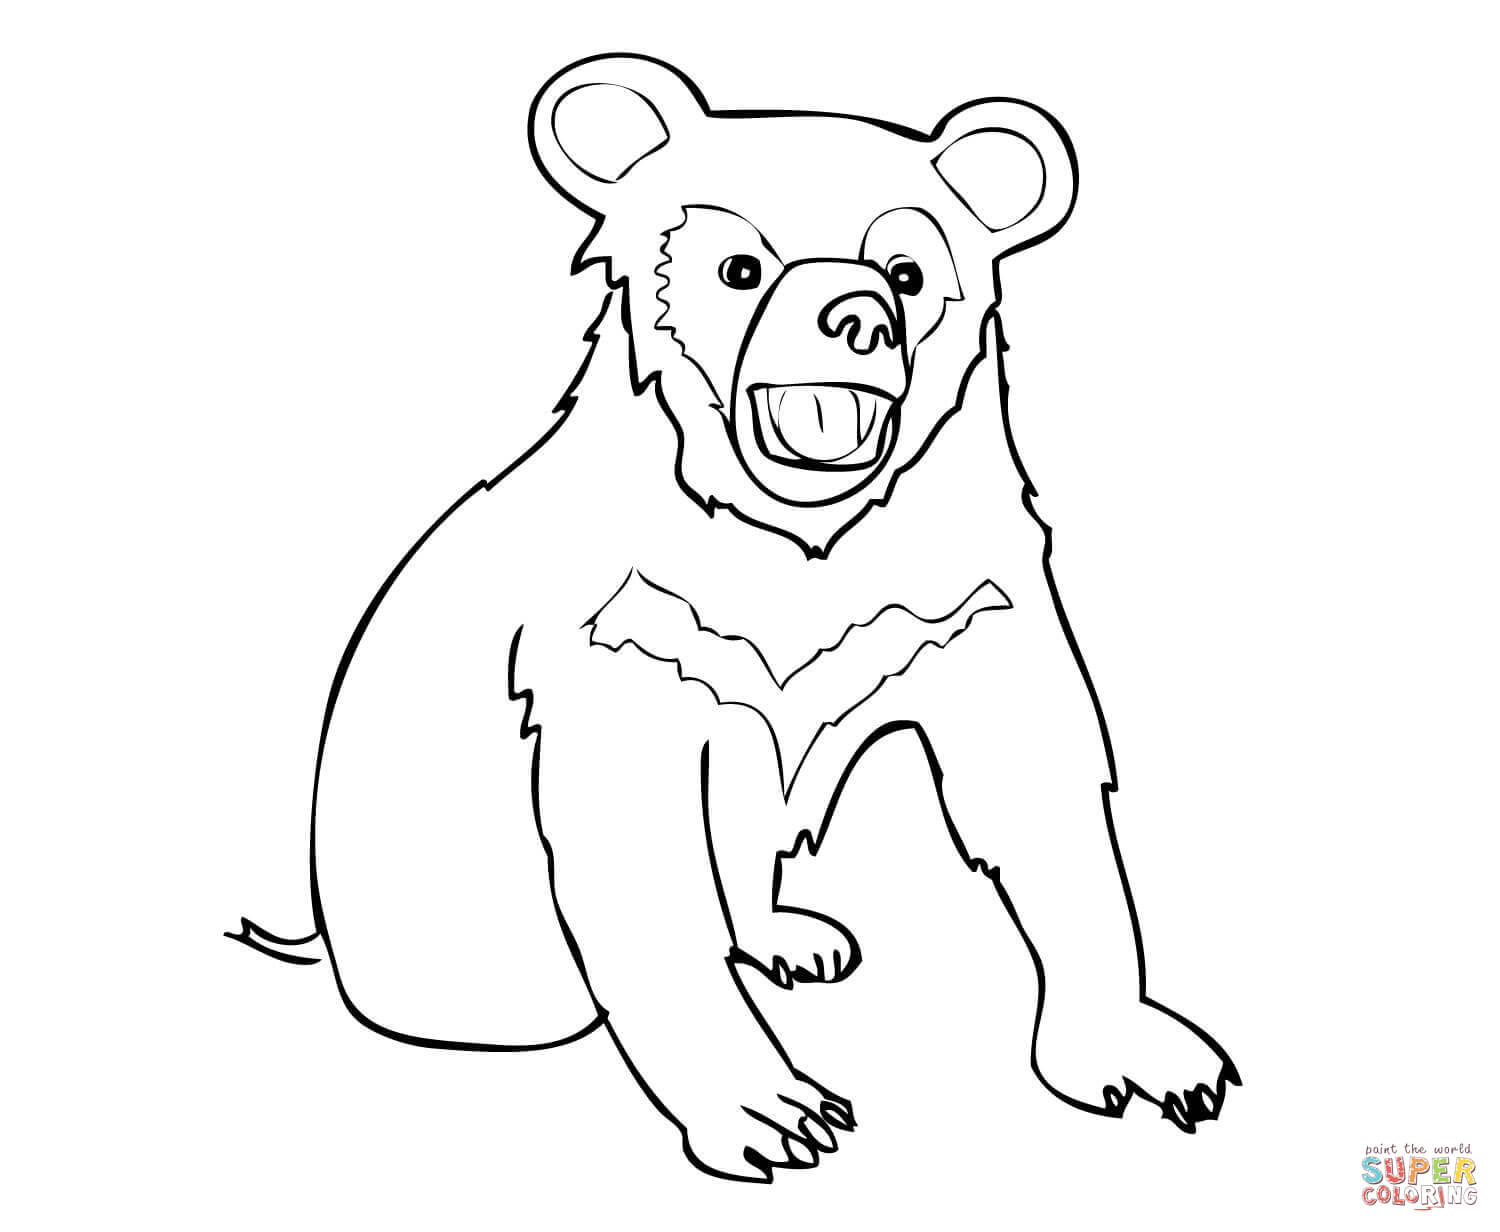 Bears Coloring Pages Asia Black Bears Coloring Pages Photo Album Sabadaphnecottage